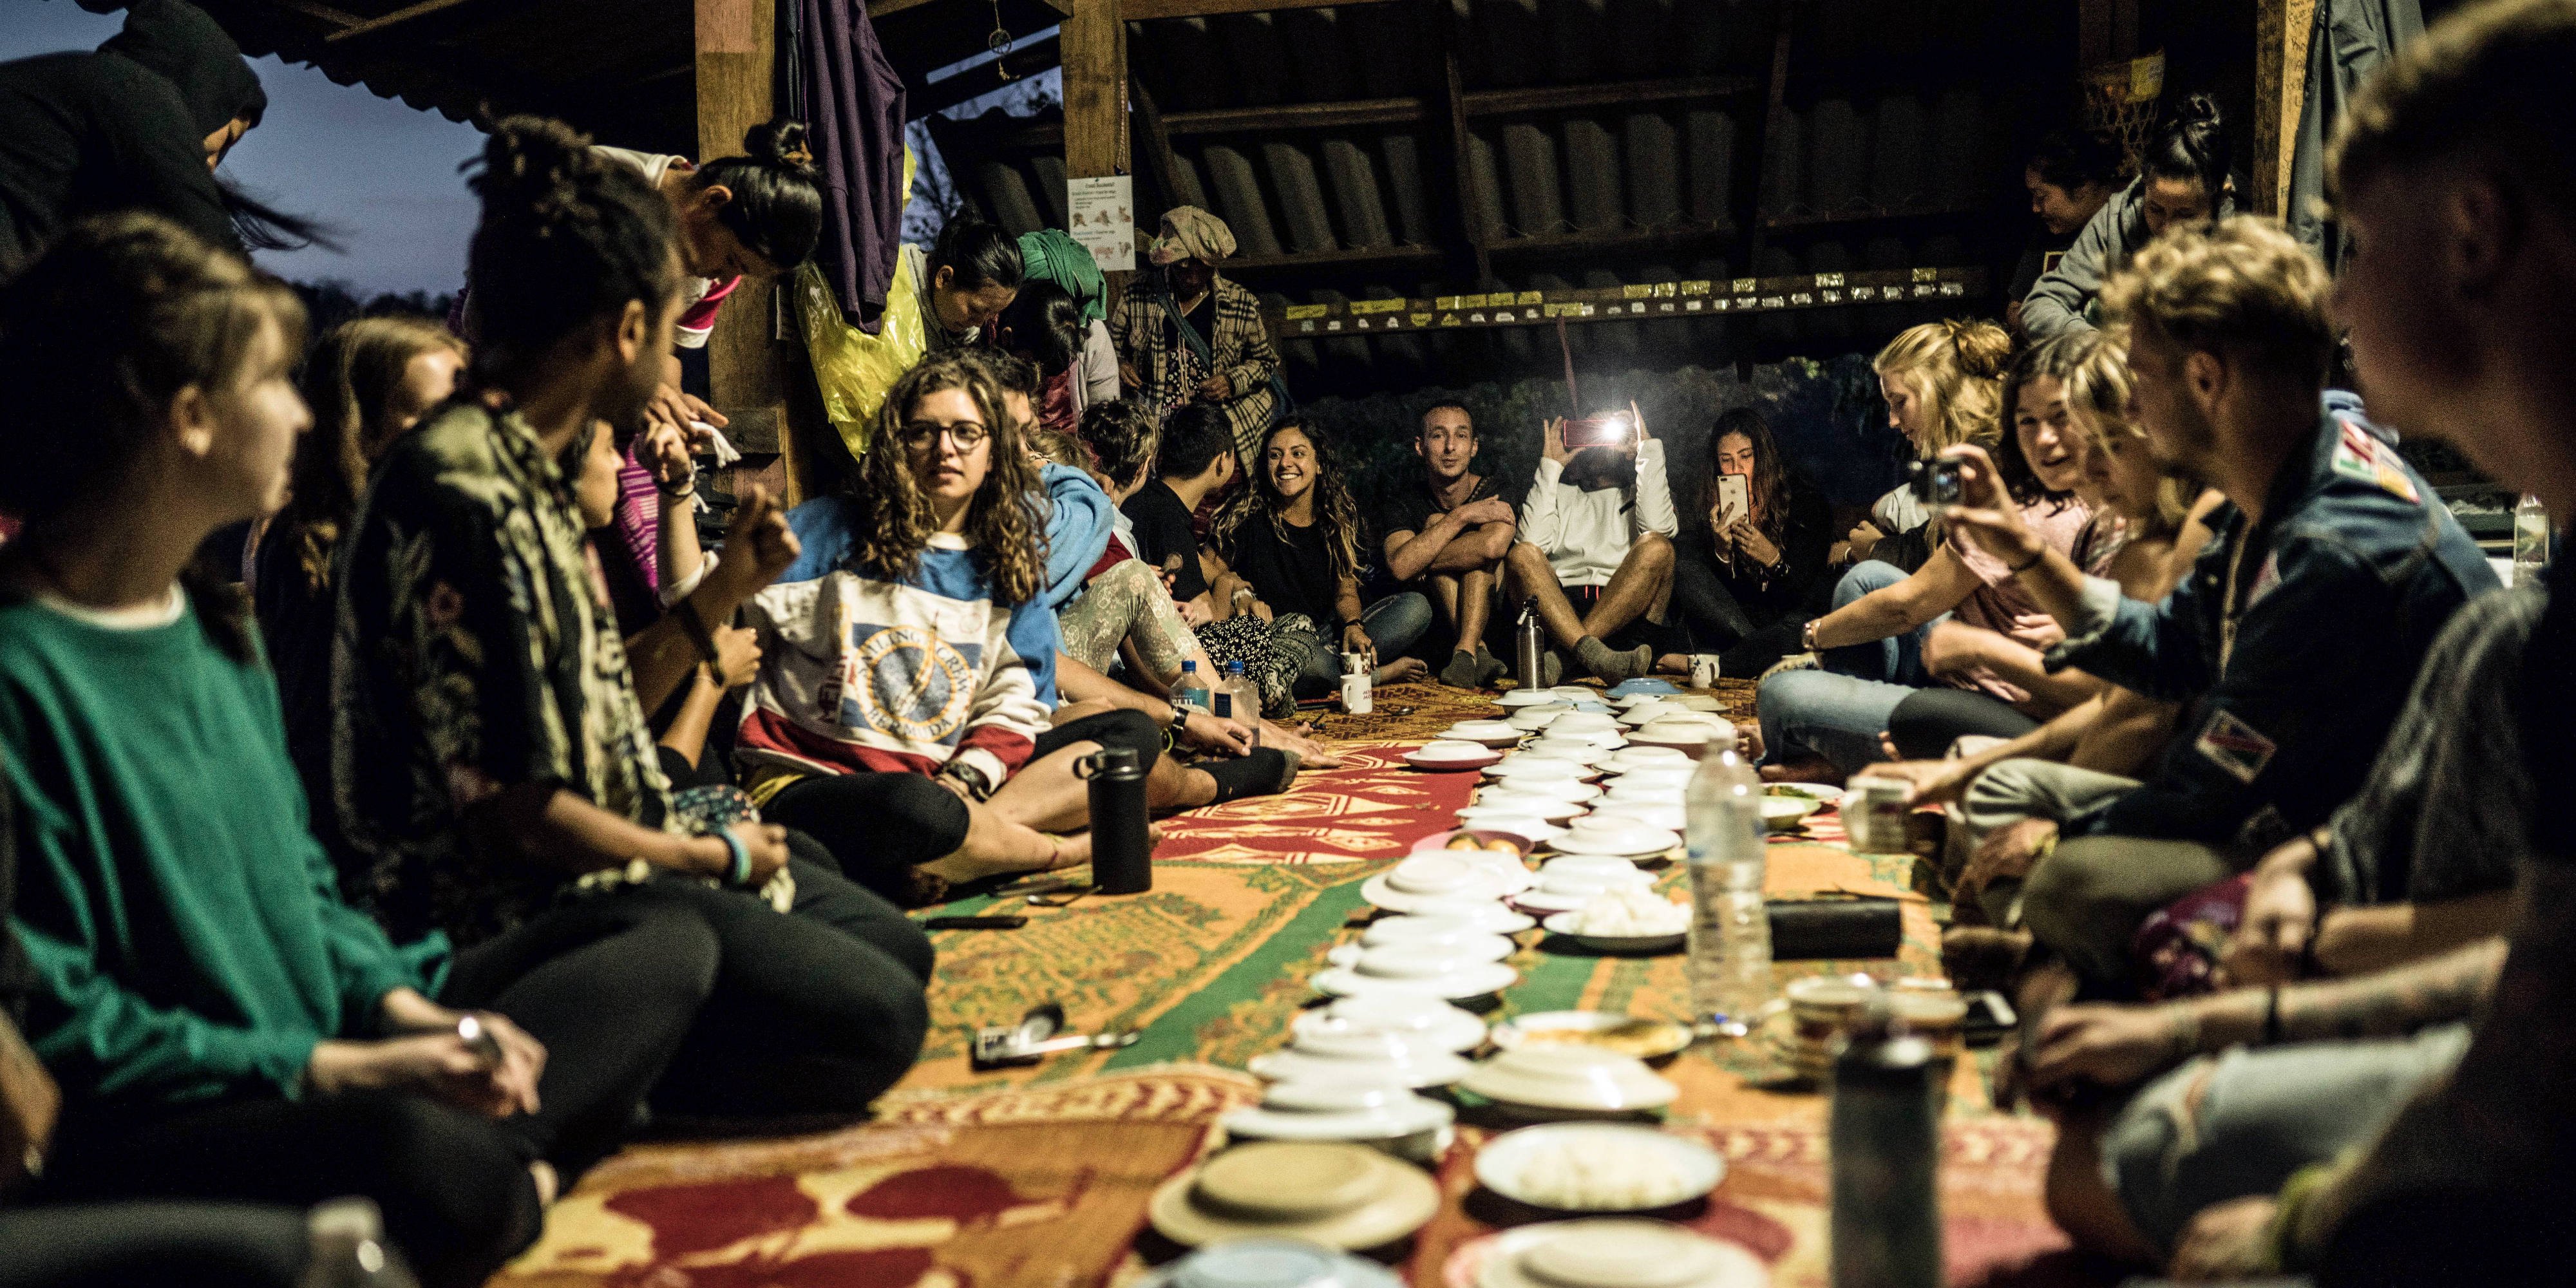 Paying to volunteer with GVI means that all your food and accommodation will be covered. Pictured: GVI volunteers share a meal in the Chiang Mai base.